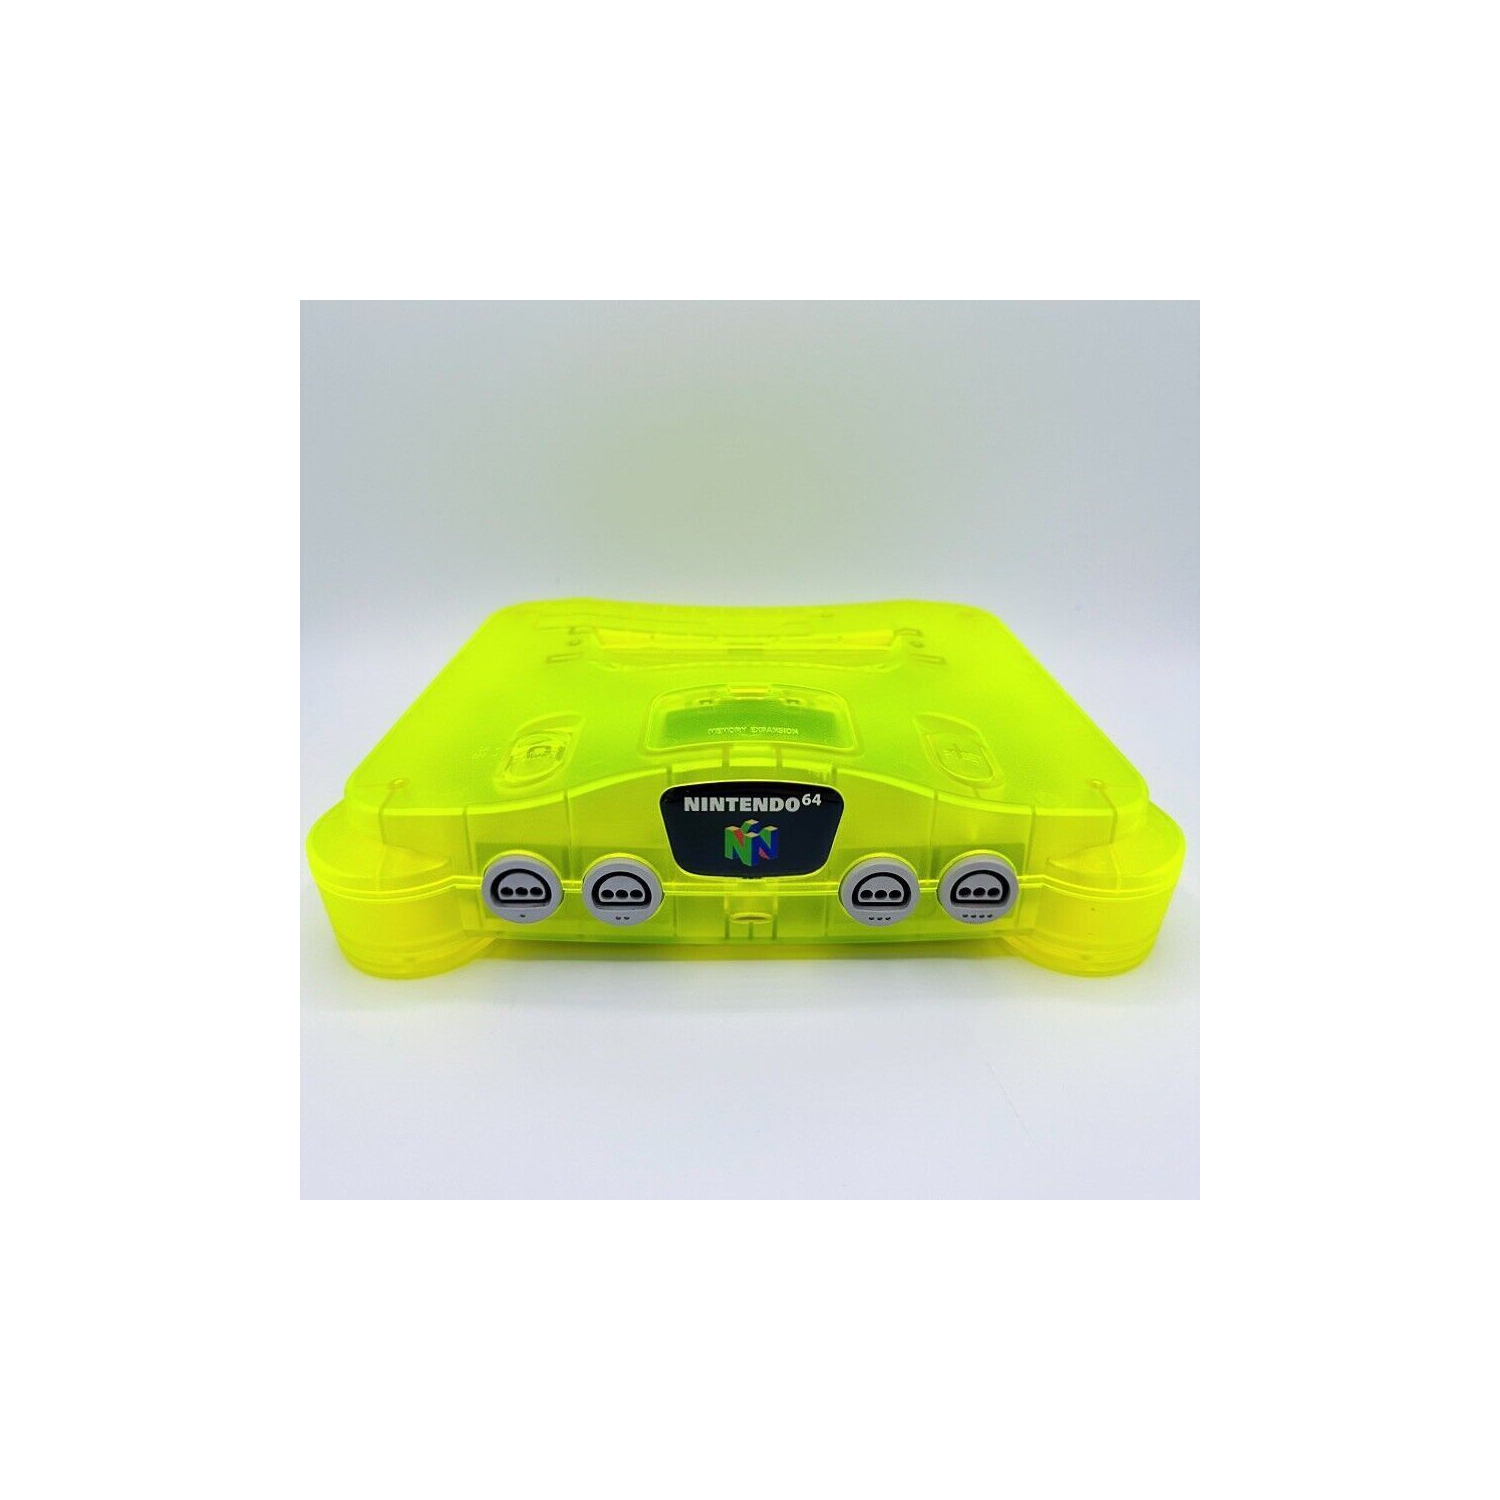 NINTENDO 64 CONSOLE Pre-Owned Refurbished Excellent Authentic Nintendo 64 N64 Clear Translucent Acid Yellow Region Free USA&JP